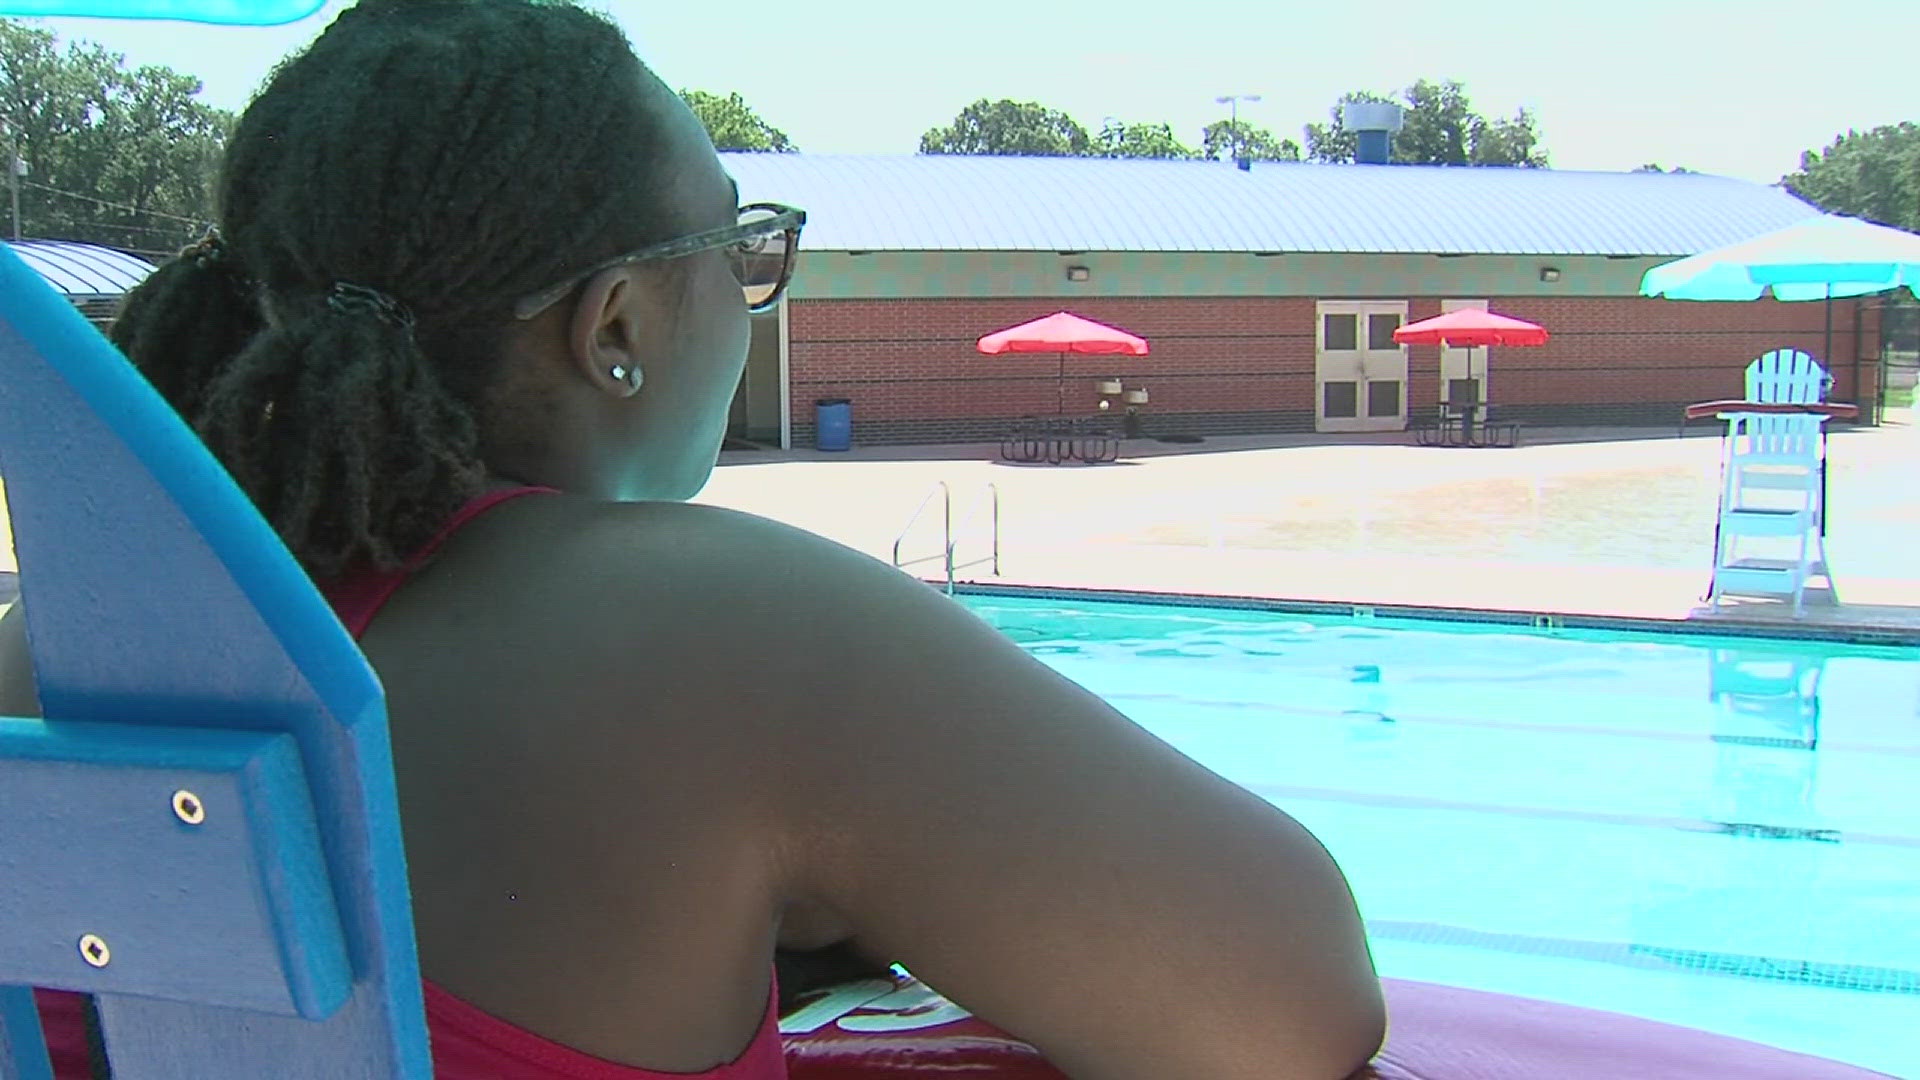 This summer, Beaumont teens have a chance to clock in for a summer job instead of checking out for the whole summer.